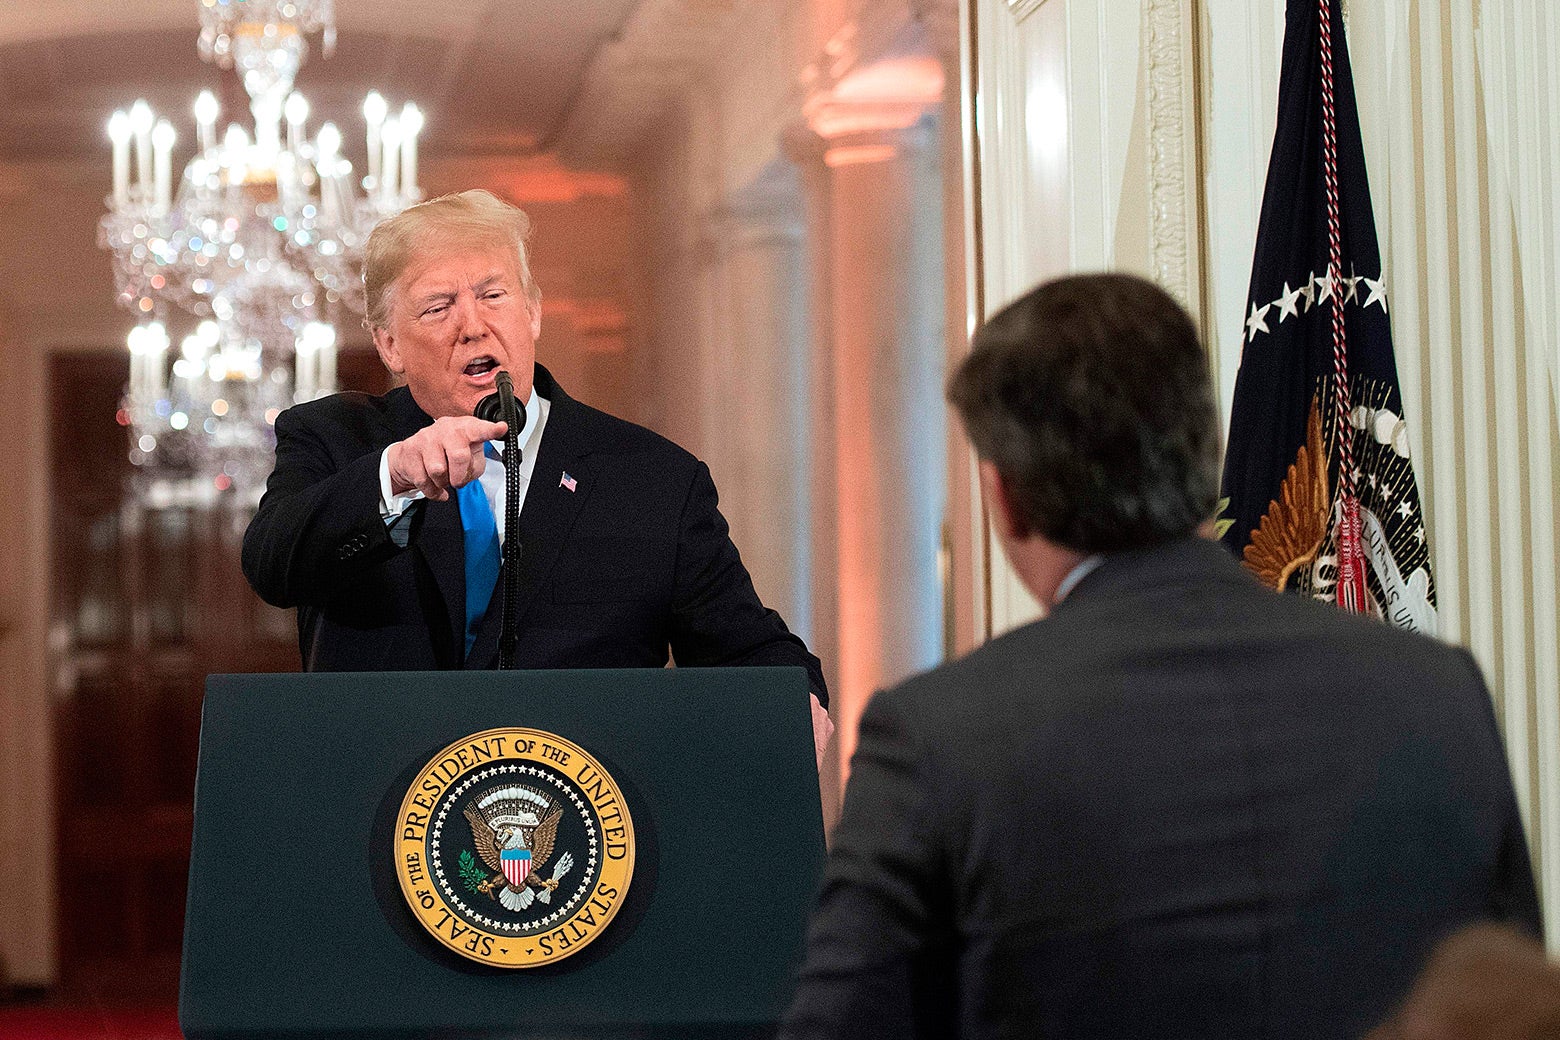 Donald Trump points angrily during a heated exchange with CNN chief White House correspondent Jim Acosta during a post-election press conference on Nov. 7.